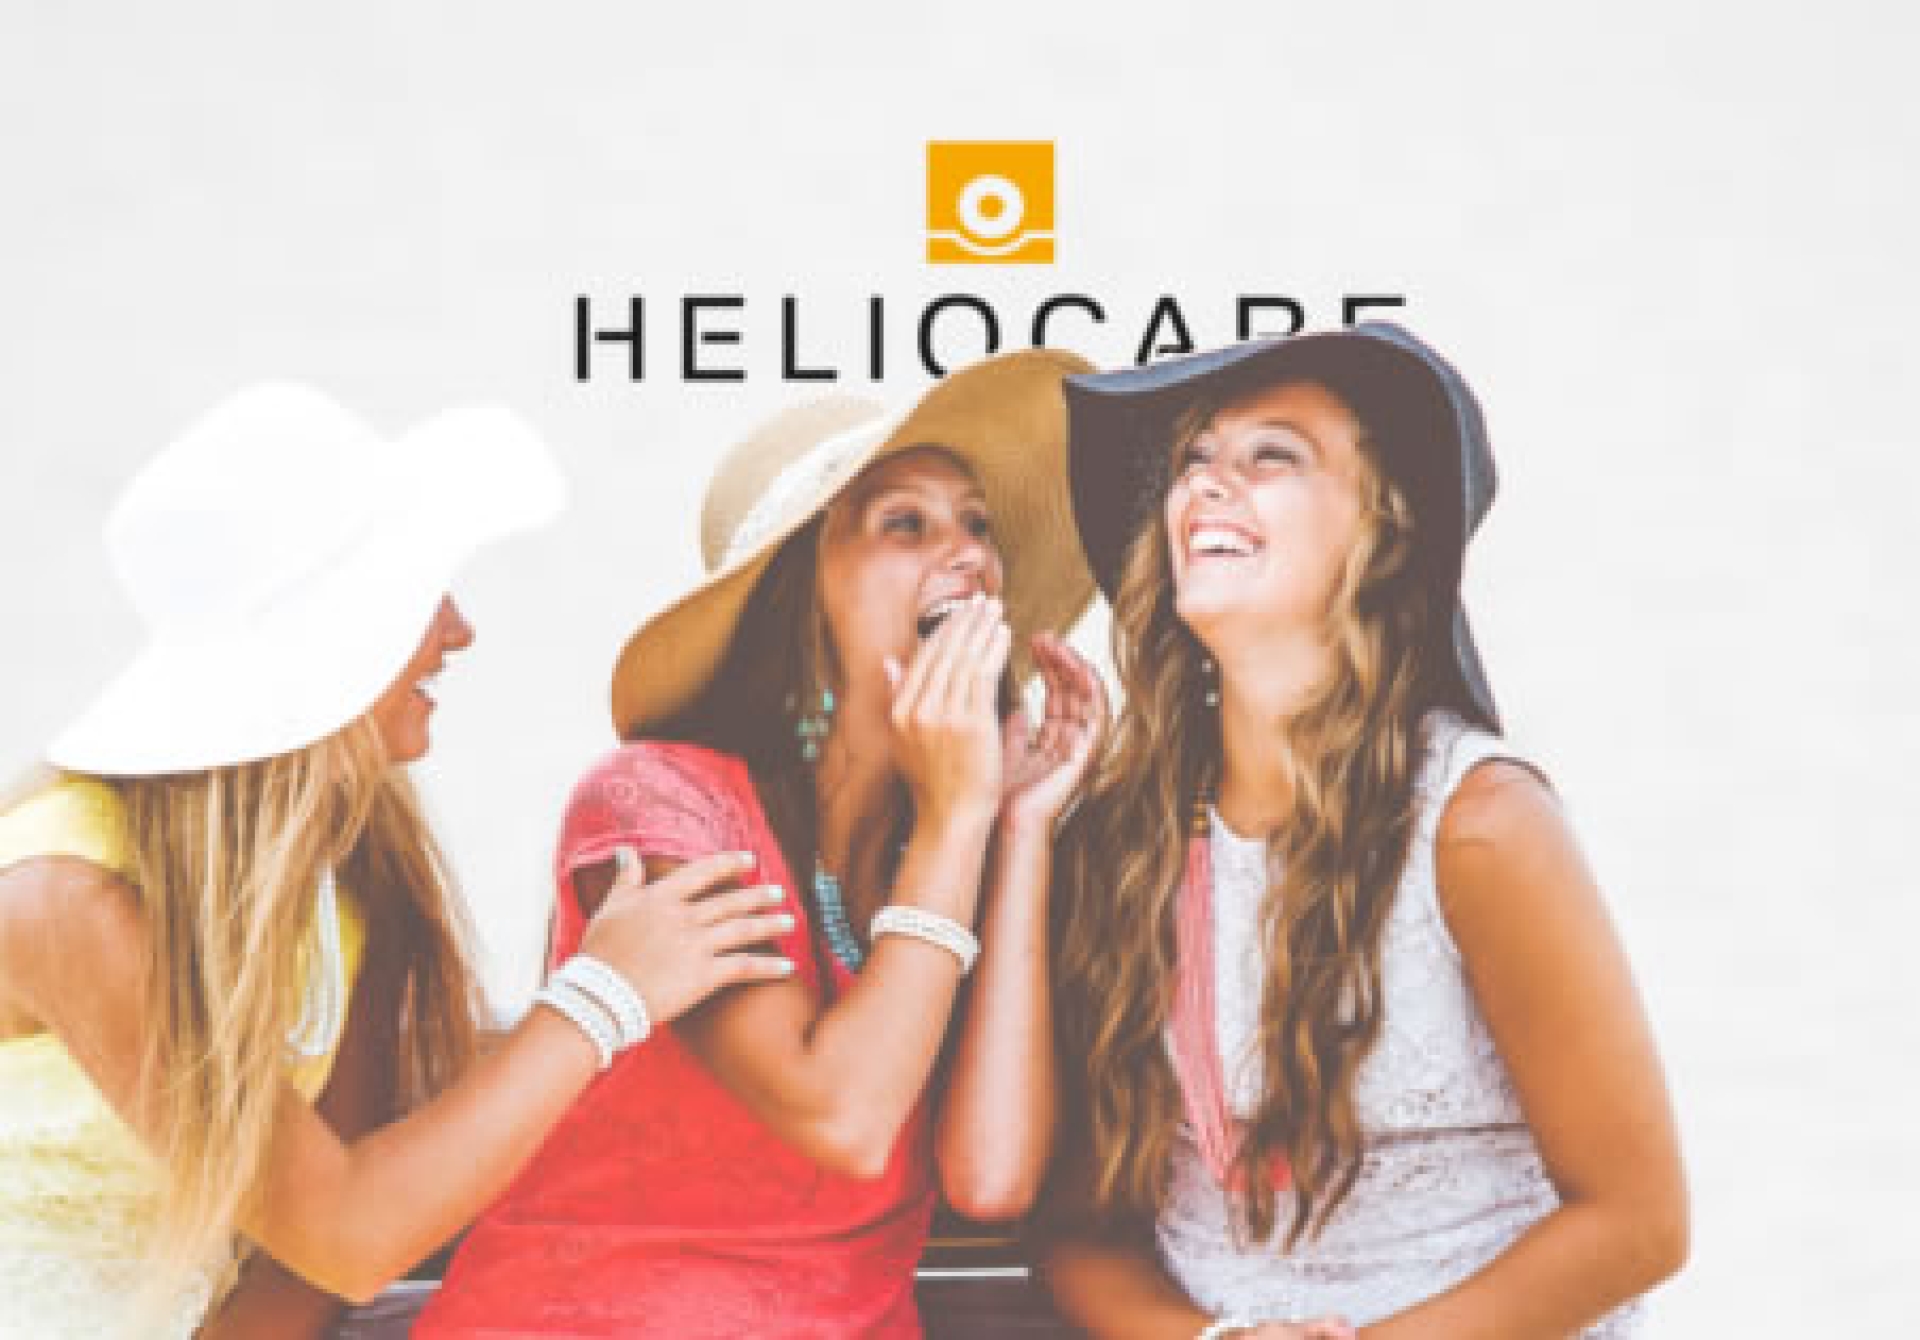 Celebrities and skin experts love @HeliocareUK